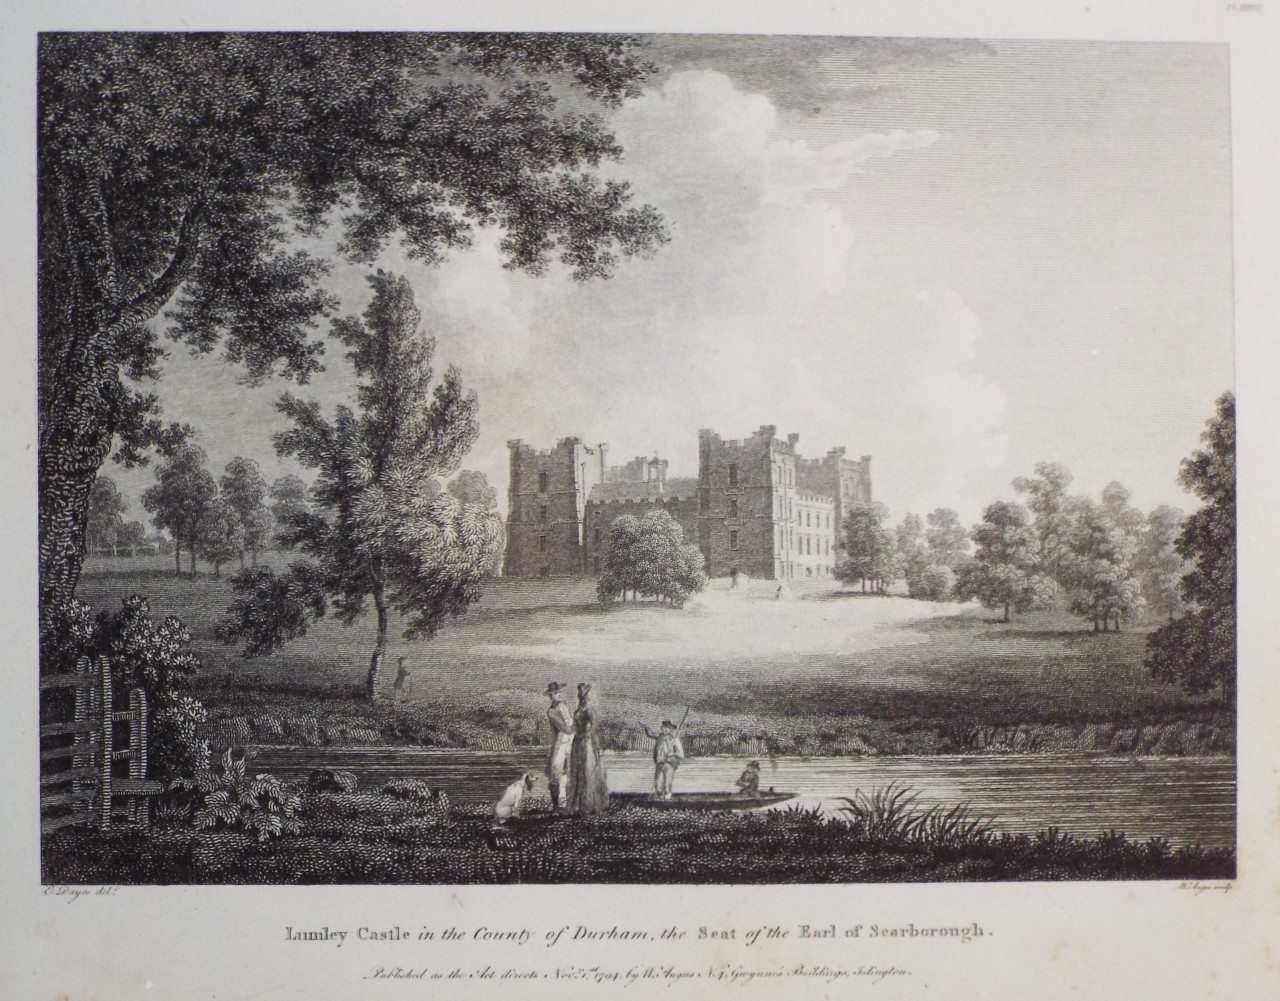 Print - Lumley Castle in the County of Durham, the Seat of the Earl of Scarborough. - Angus